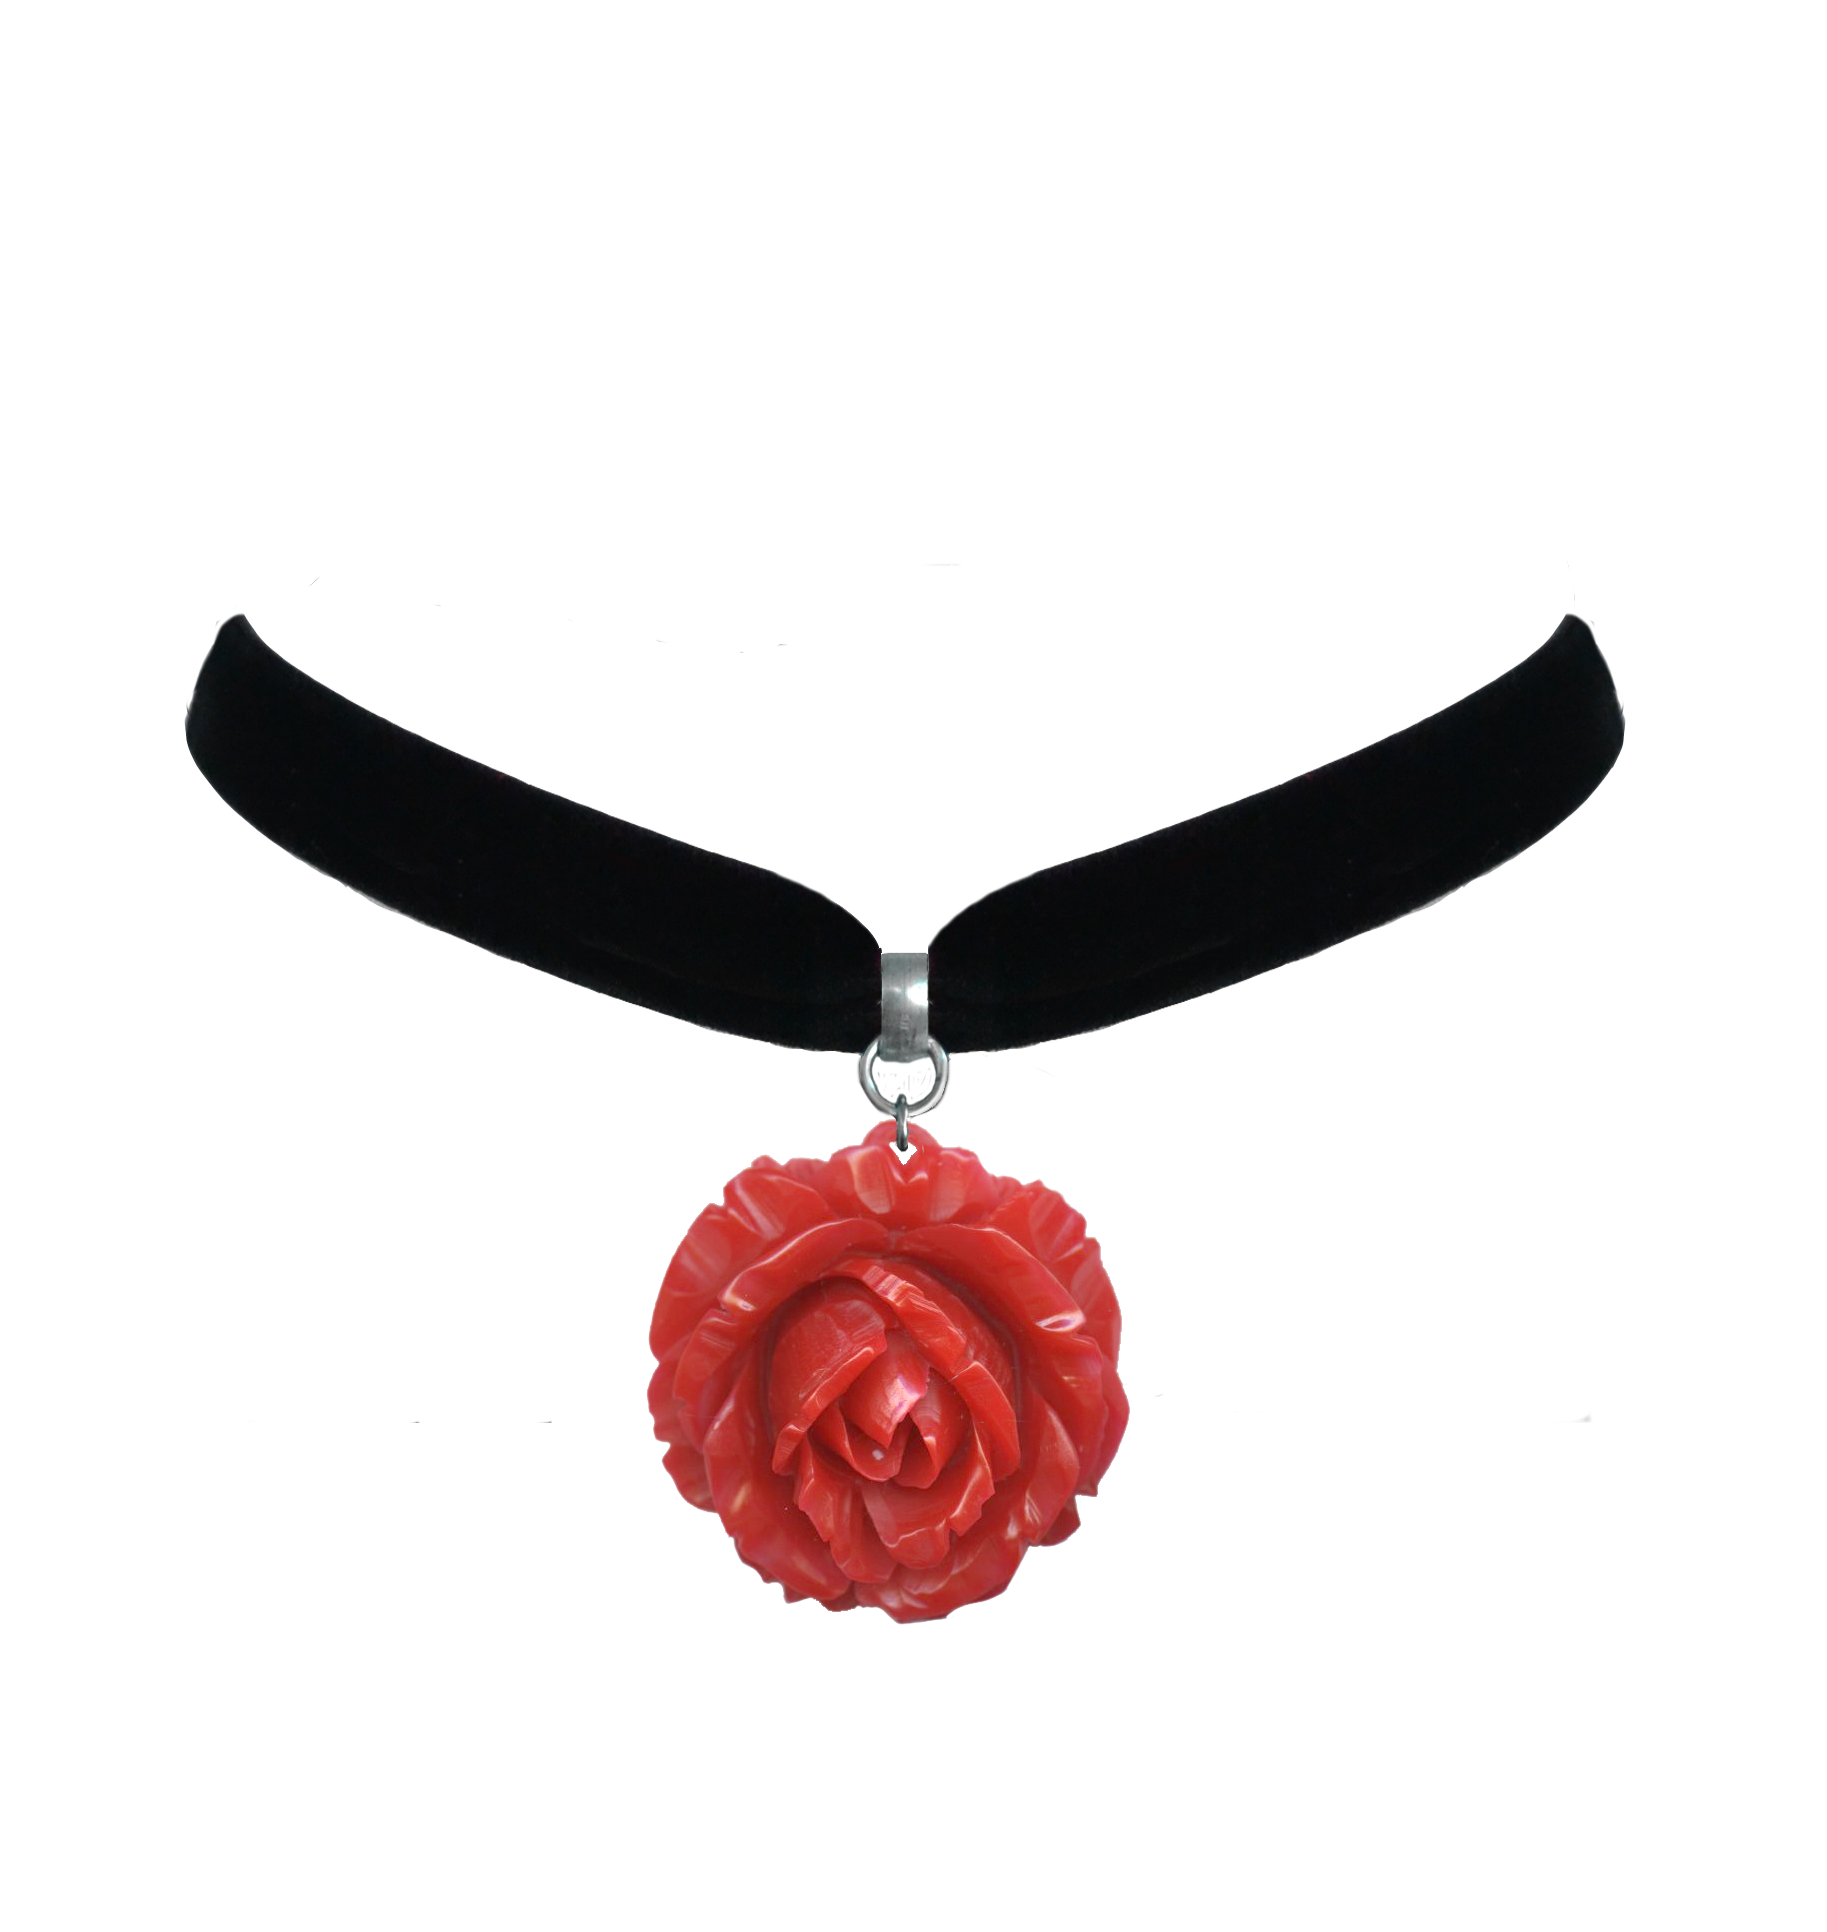 Choker Necklace Red Rose and Vintage Black Lace - $8.00